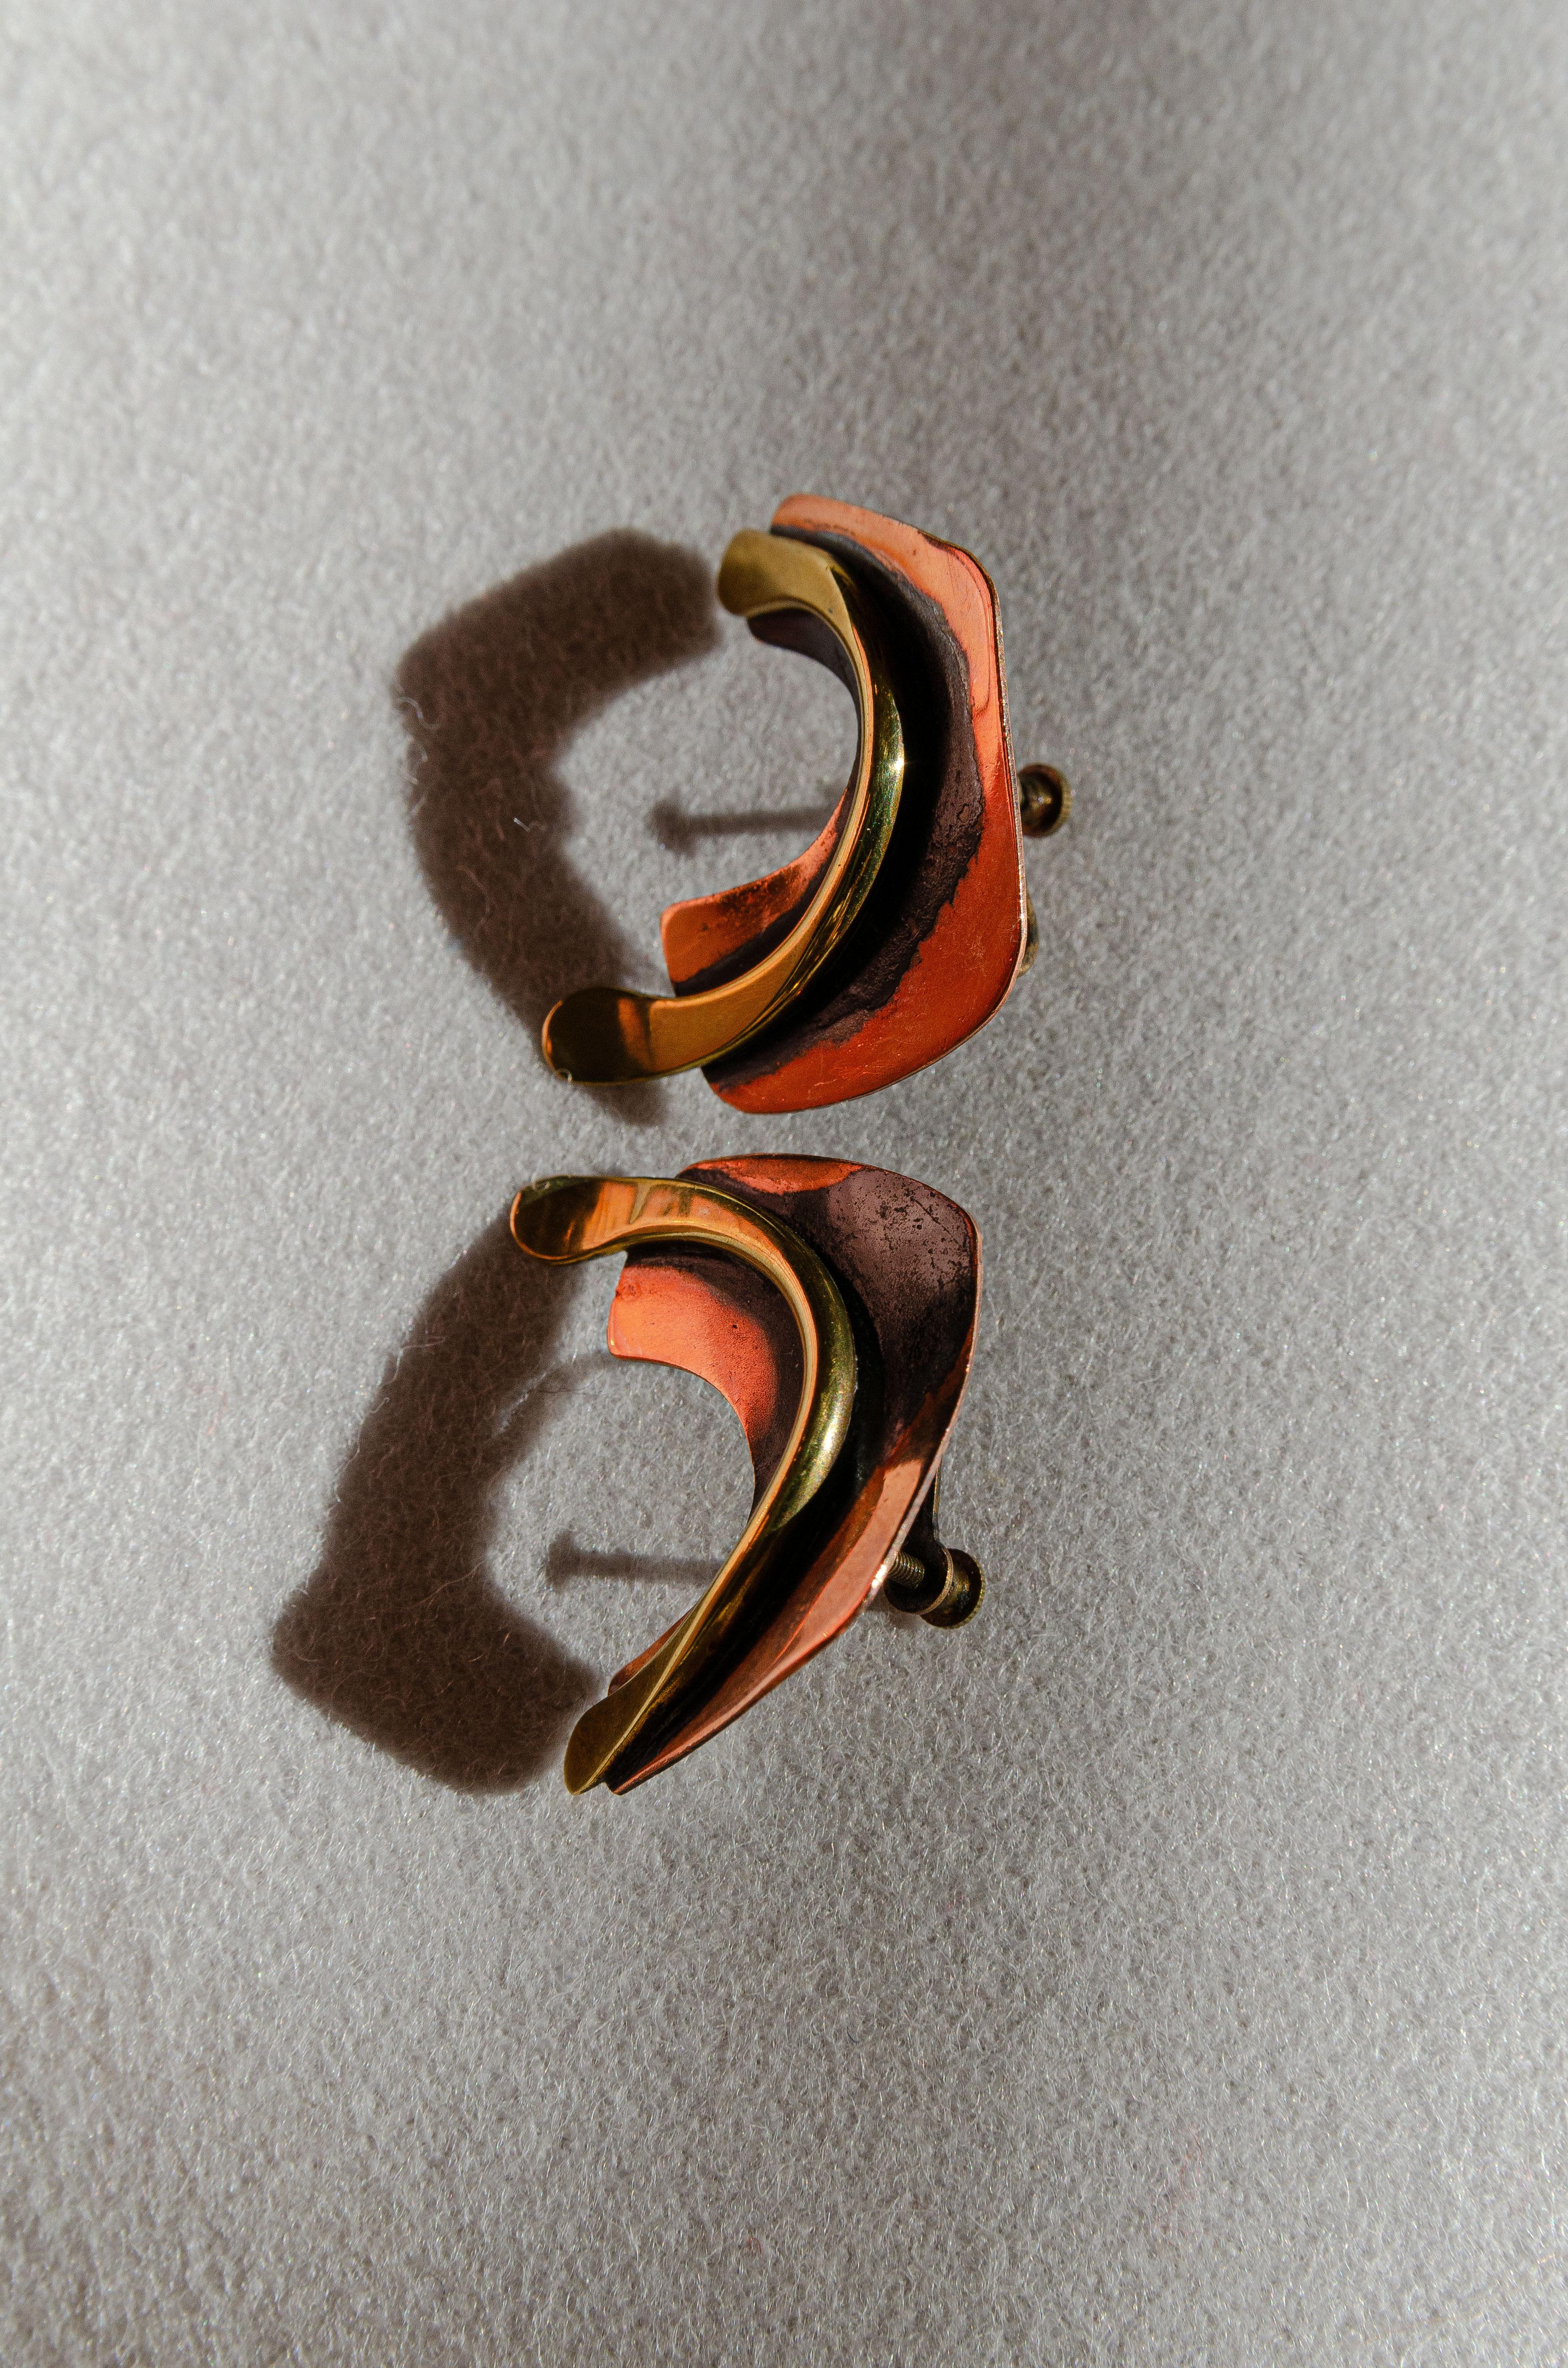 American Dynamic Mid-Century Modernist Copper and Brass Biomorphic Earrings By Art Smith For Sale